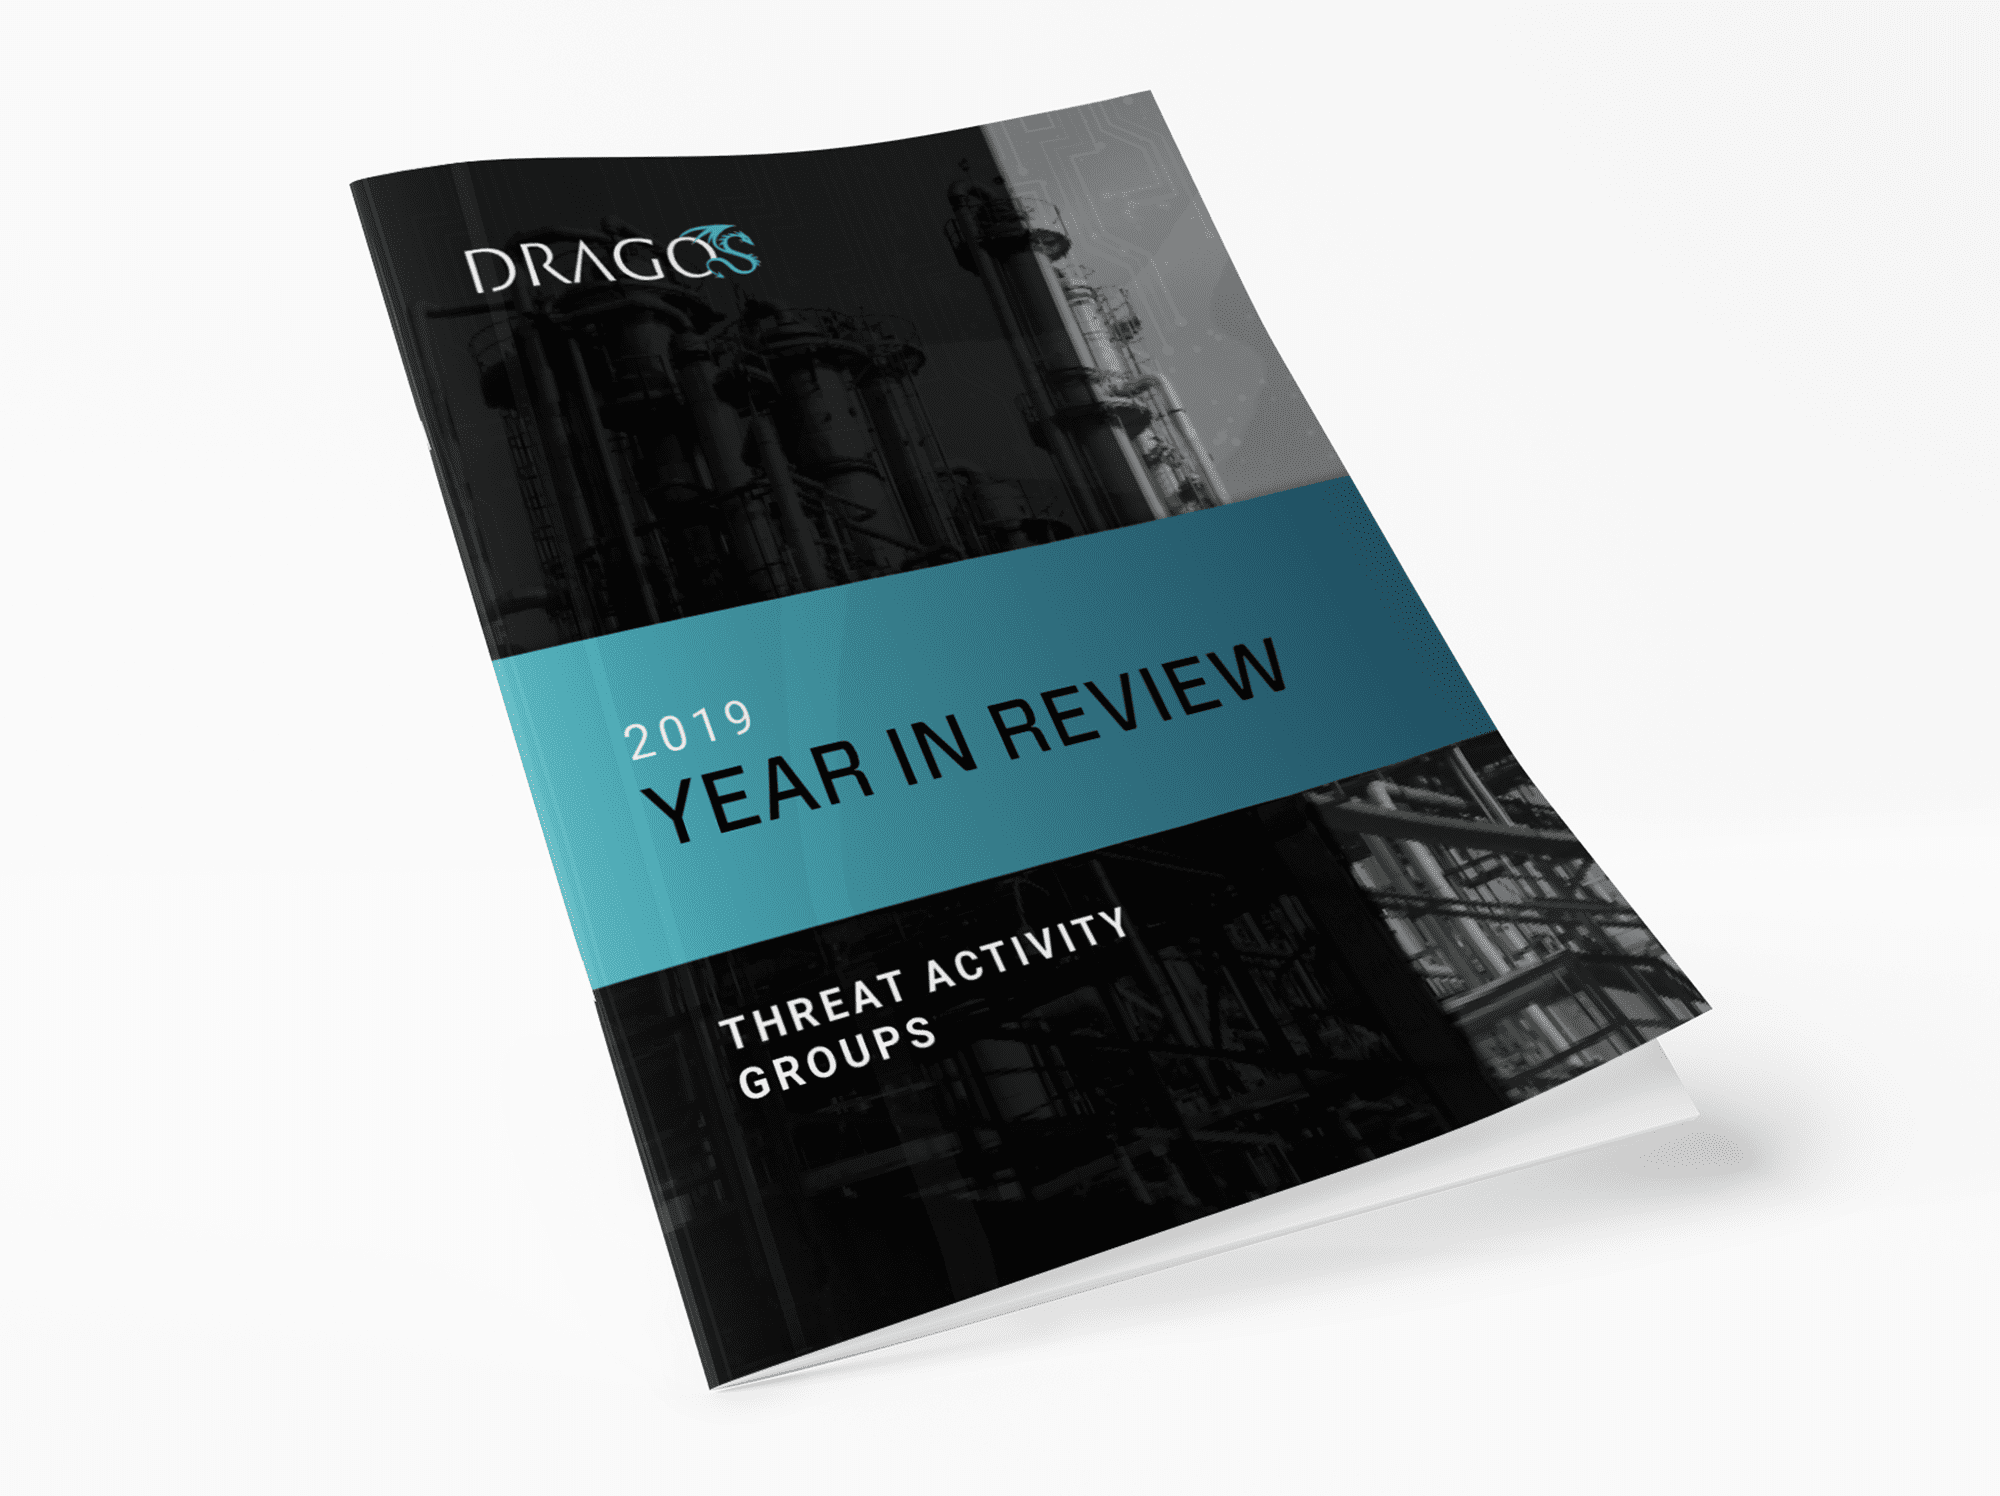 Dragos Year in Review